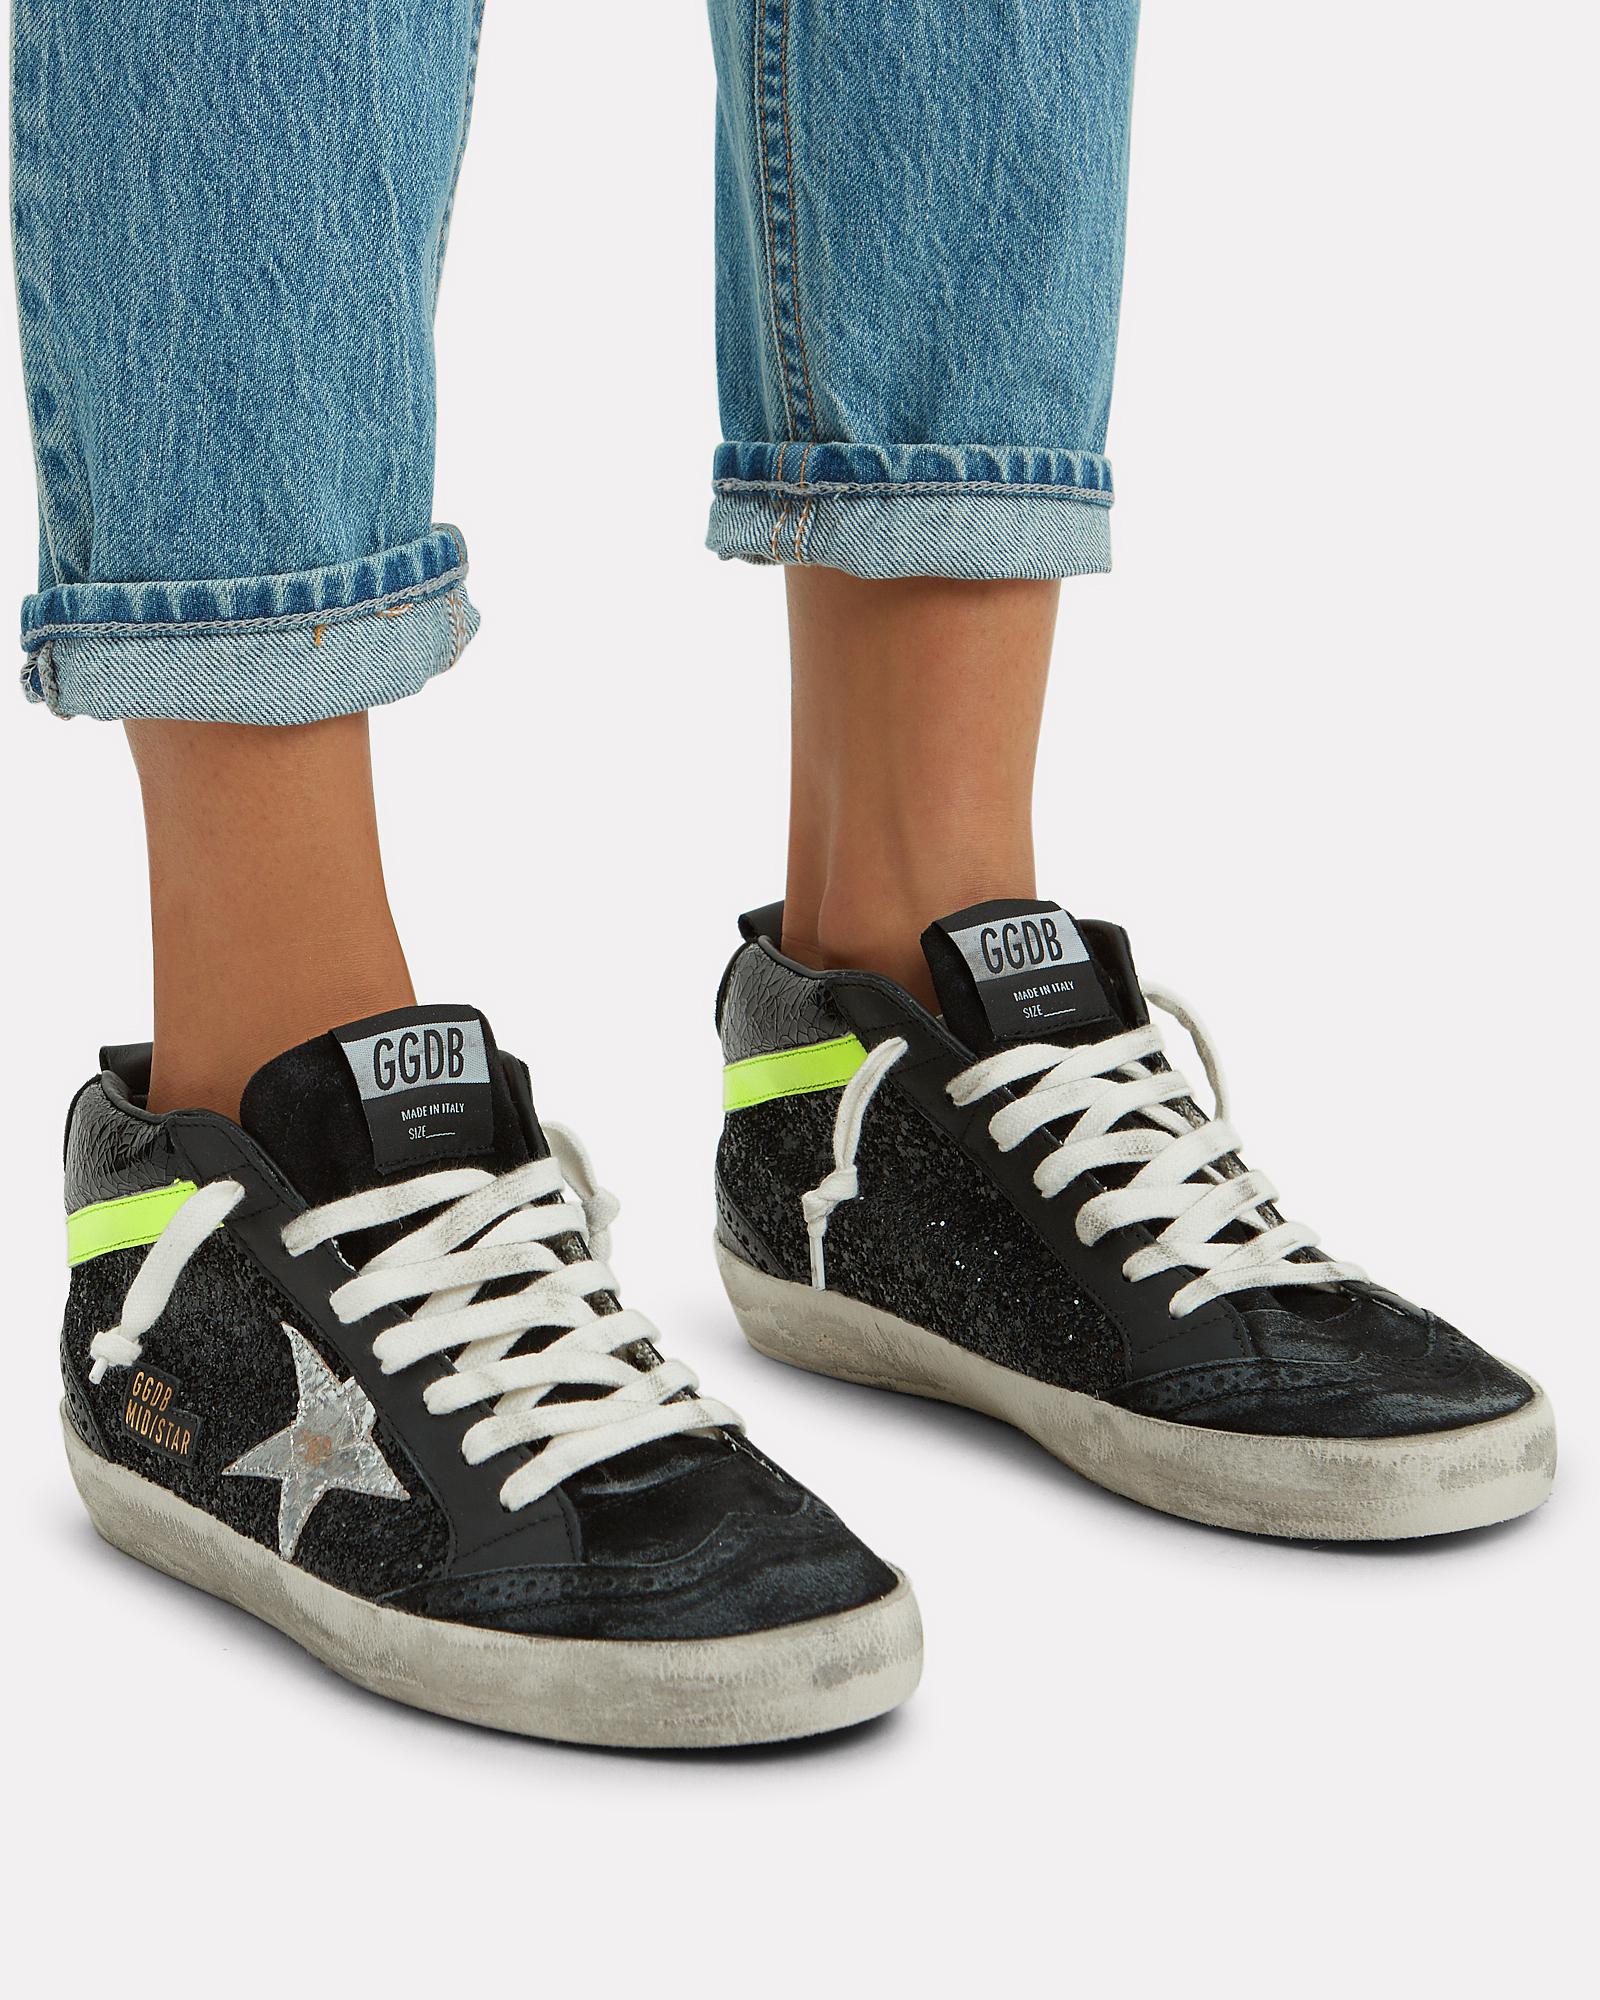 Golden Goose Deluxe Brand Leather Black Glitter Mid Star Sneakers - Lyst